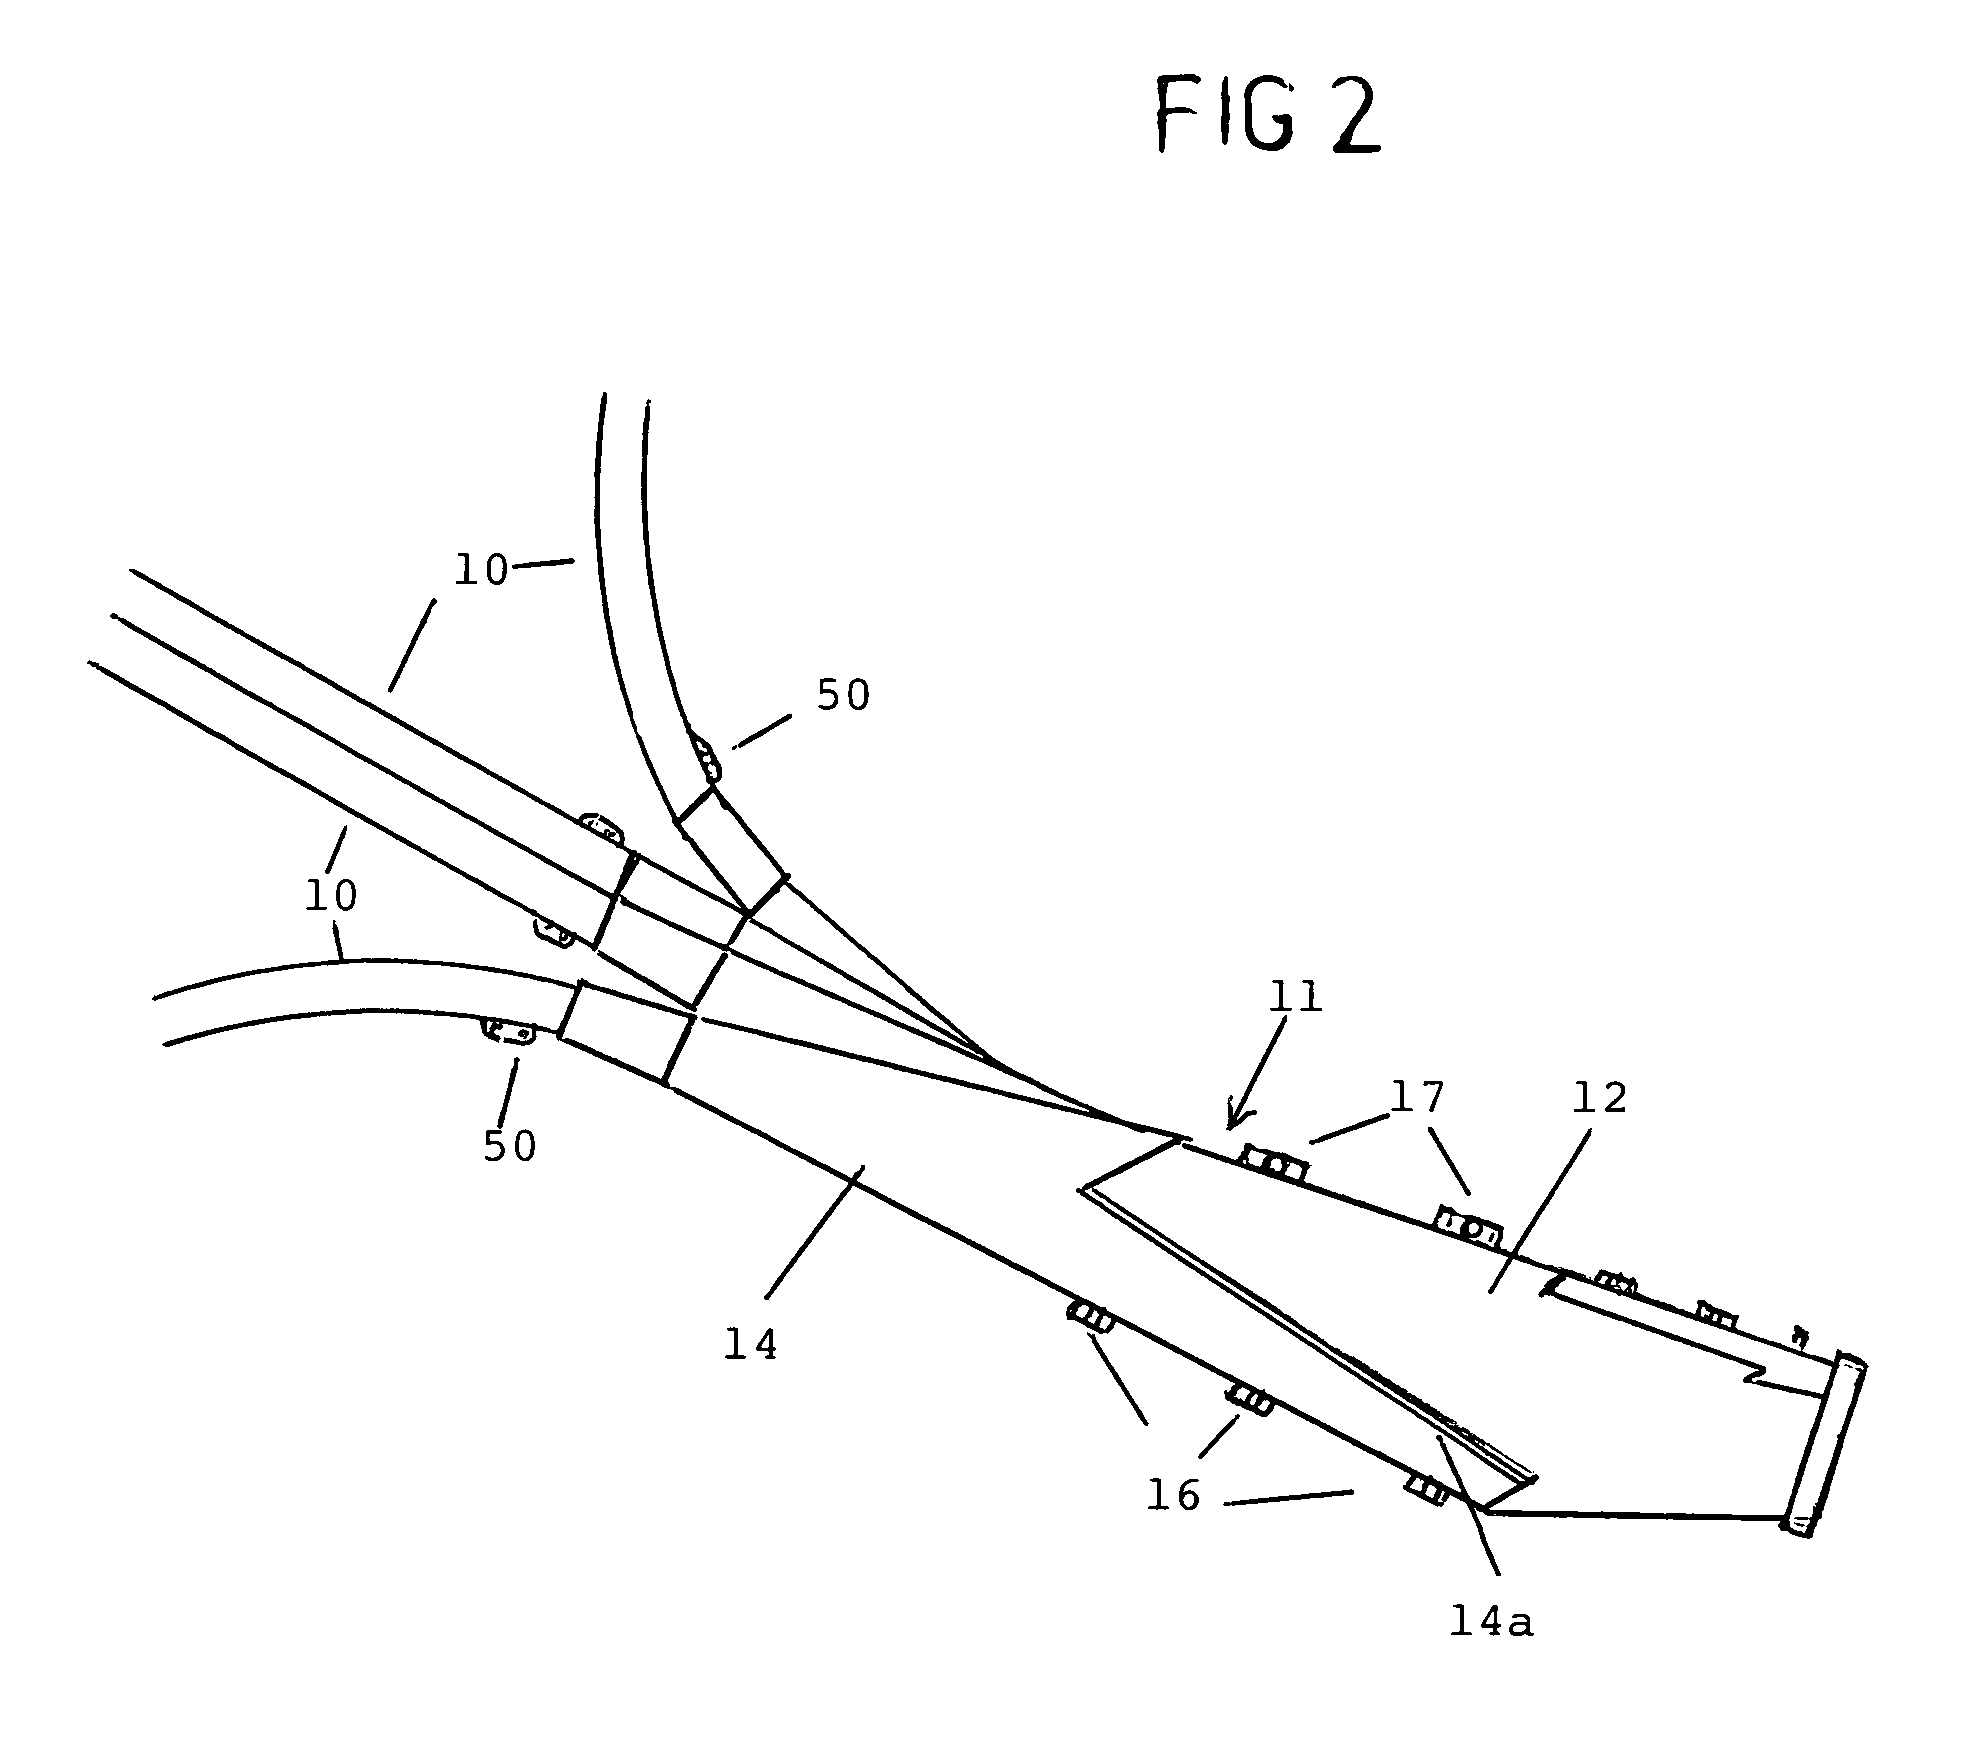 Multiple variable outlets shooting apparatus